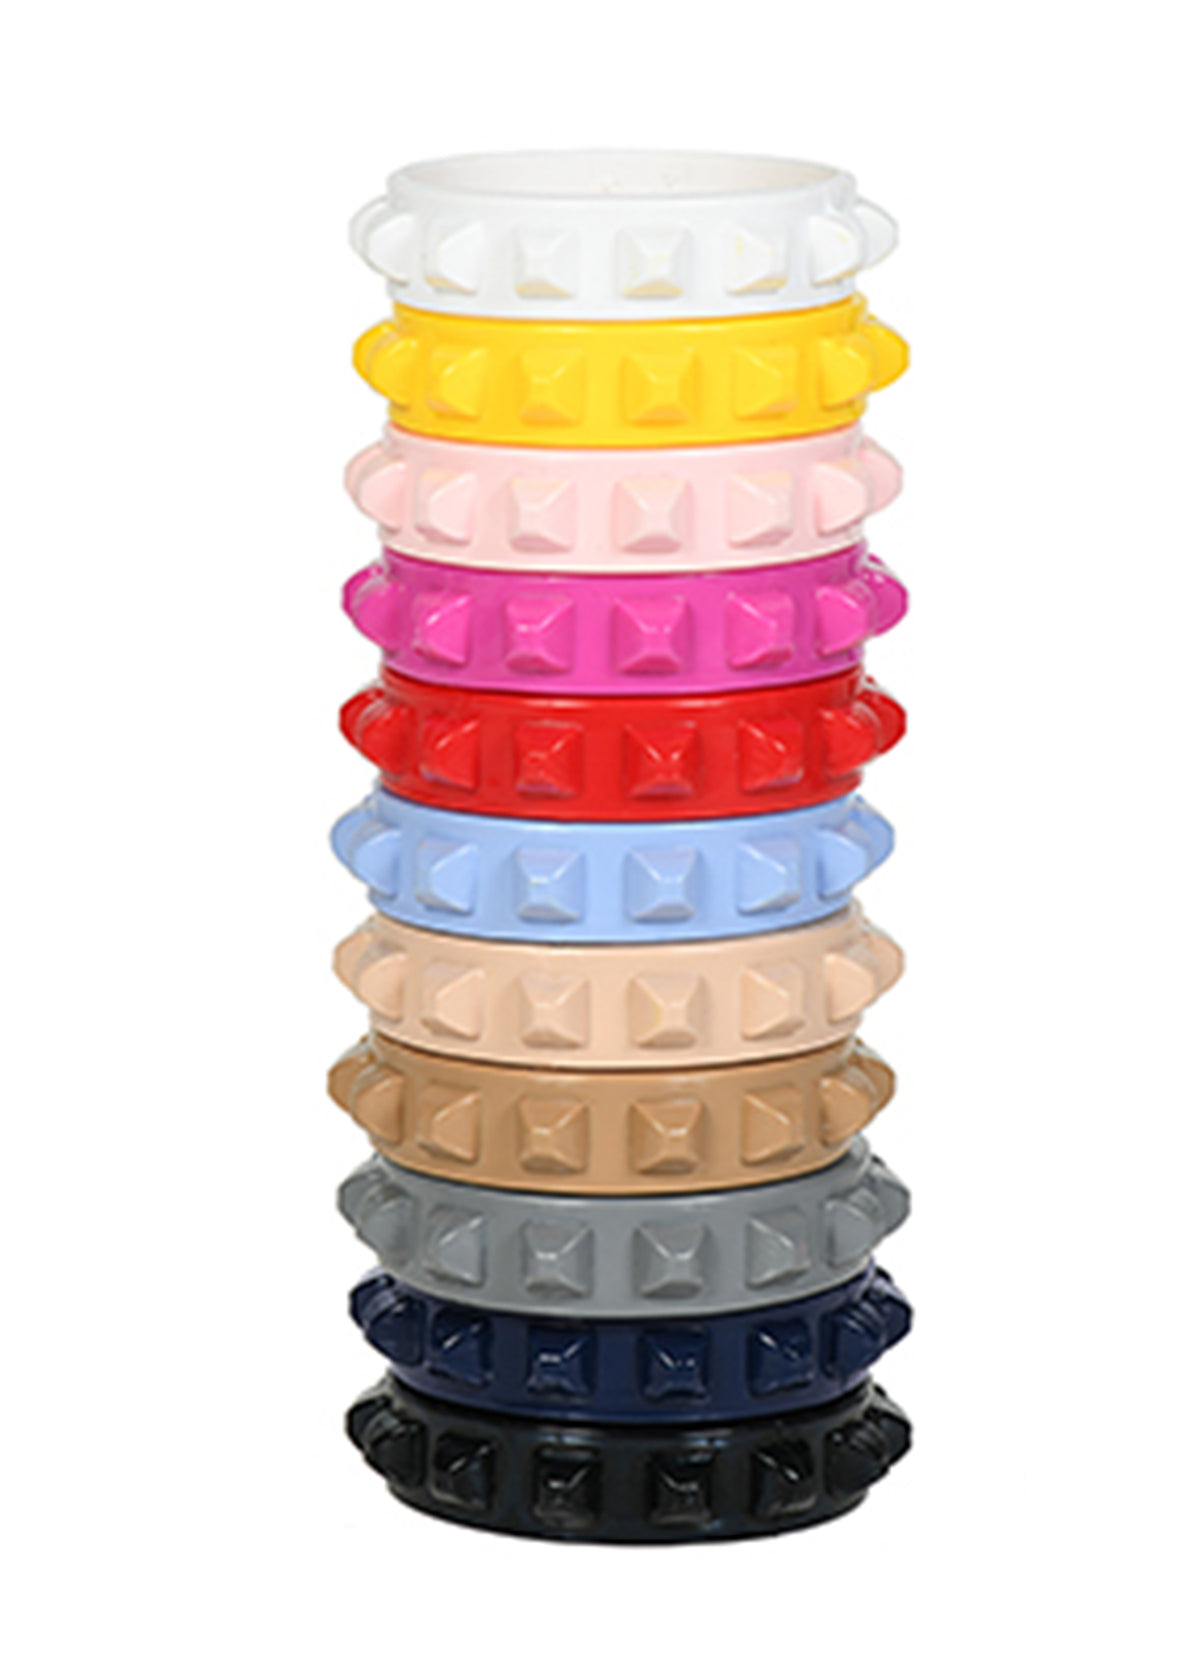 Stackable bracelets in vivid colors and plastic jelly material